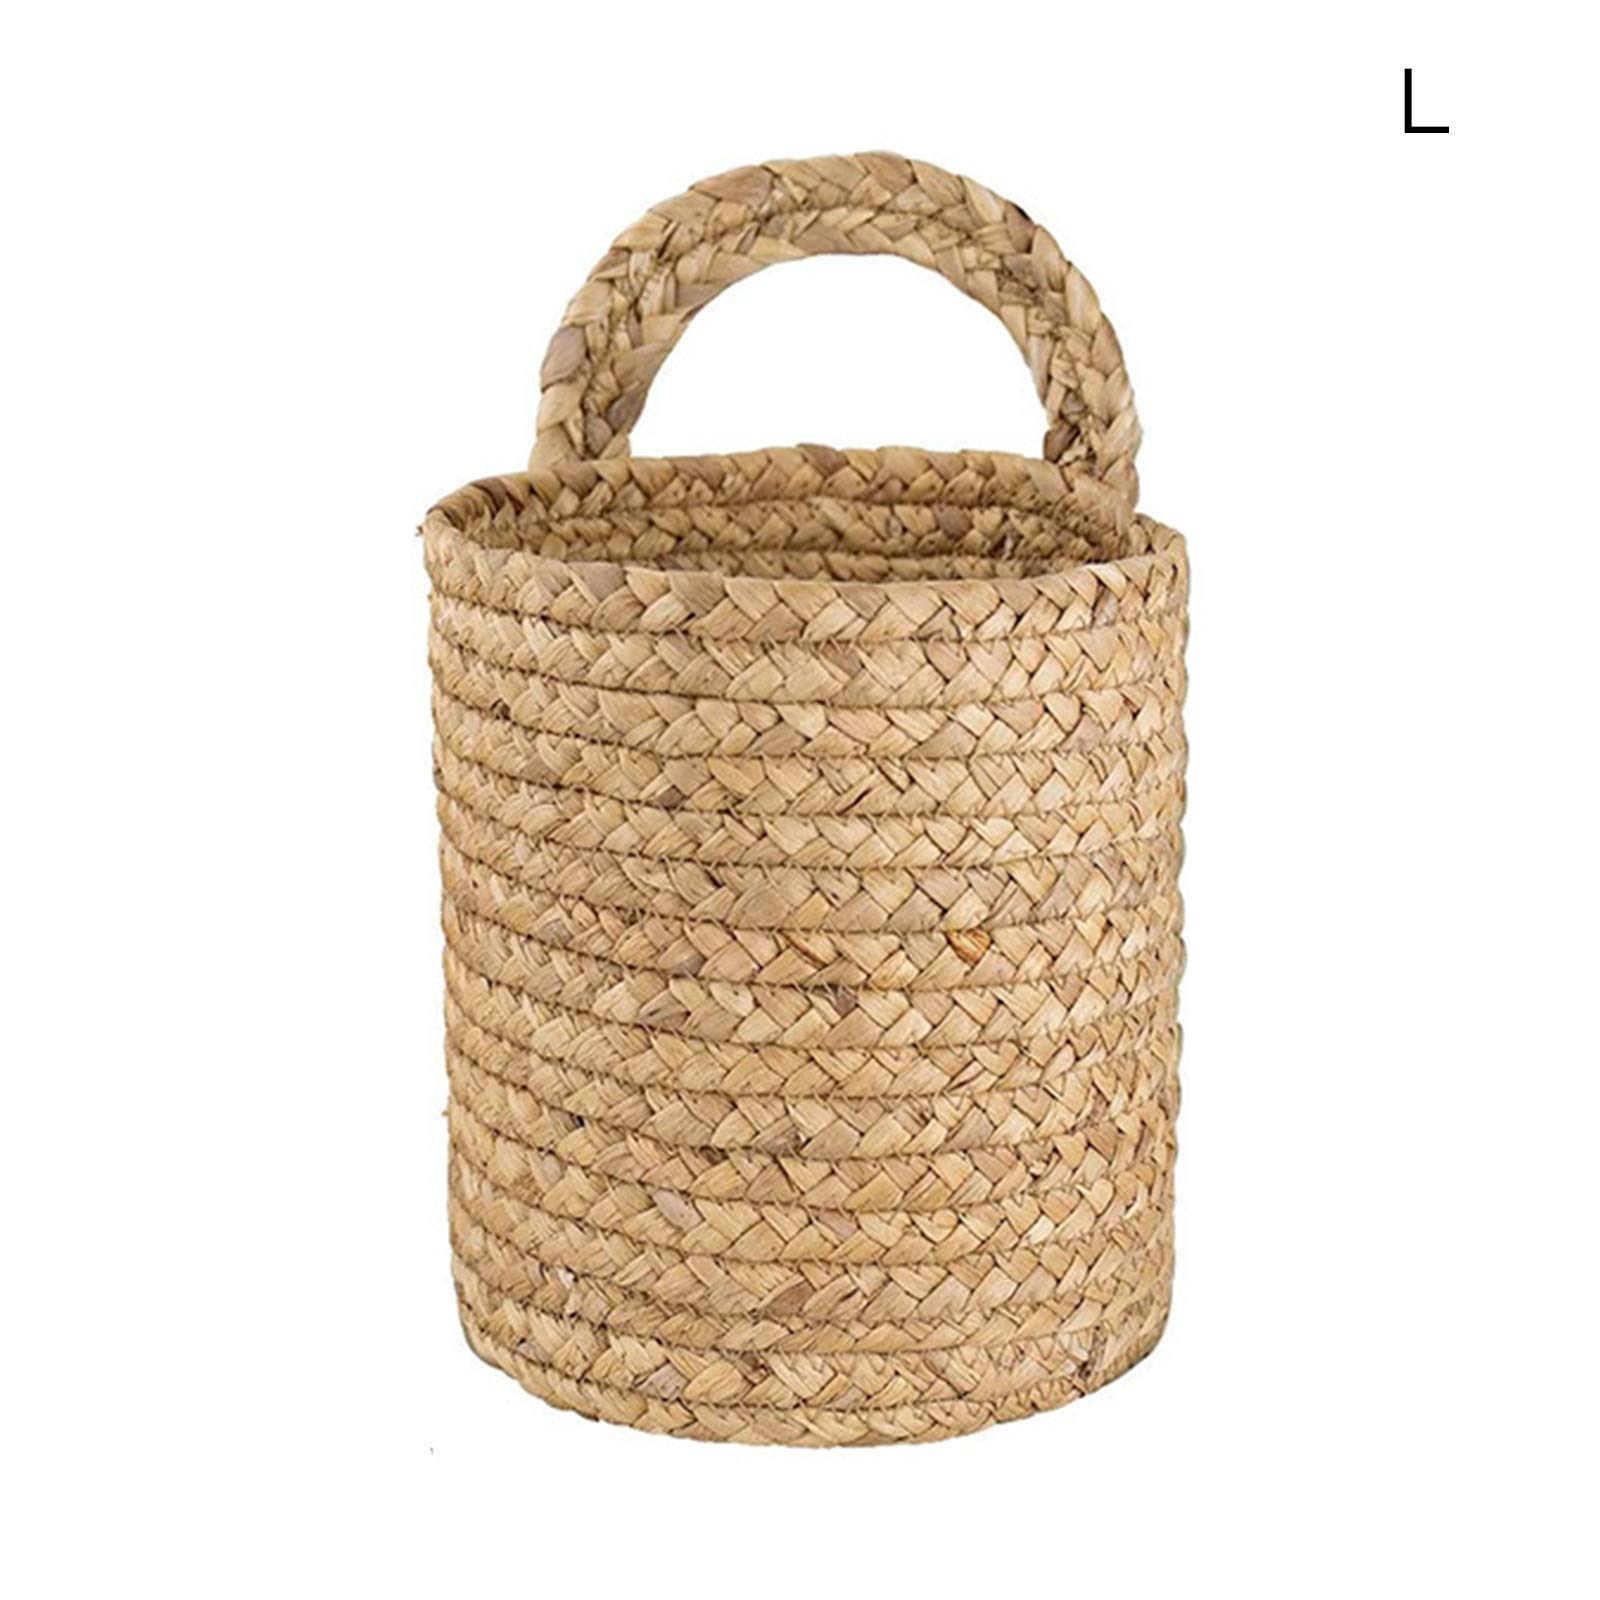 HUIKJI 2Pcs Water Hyacinth Hanging Baskets,Hand Woven Baskets for Plants & Accessories,Wall Hanging Small Storage Baskets Natural Sea Weed Baskets Garden Plant Baskets